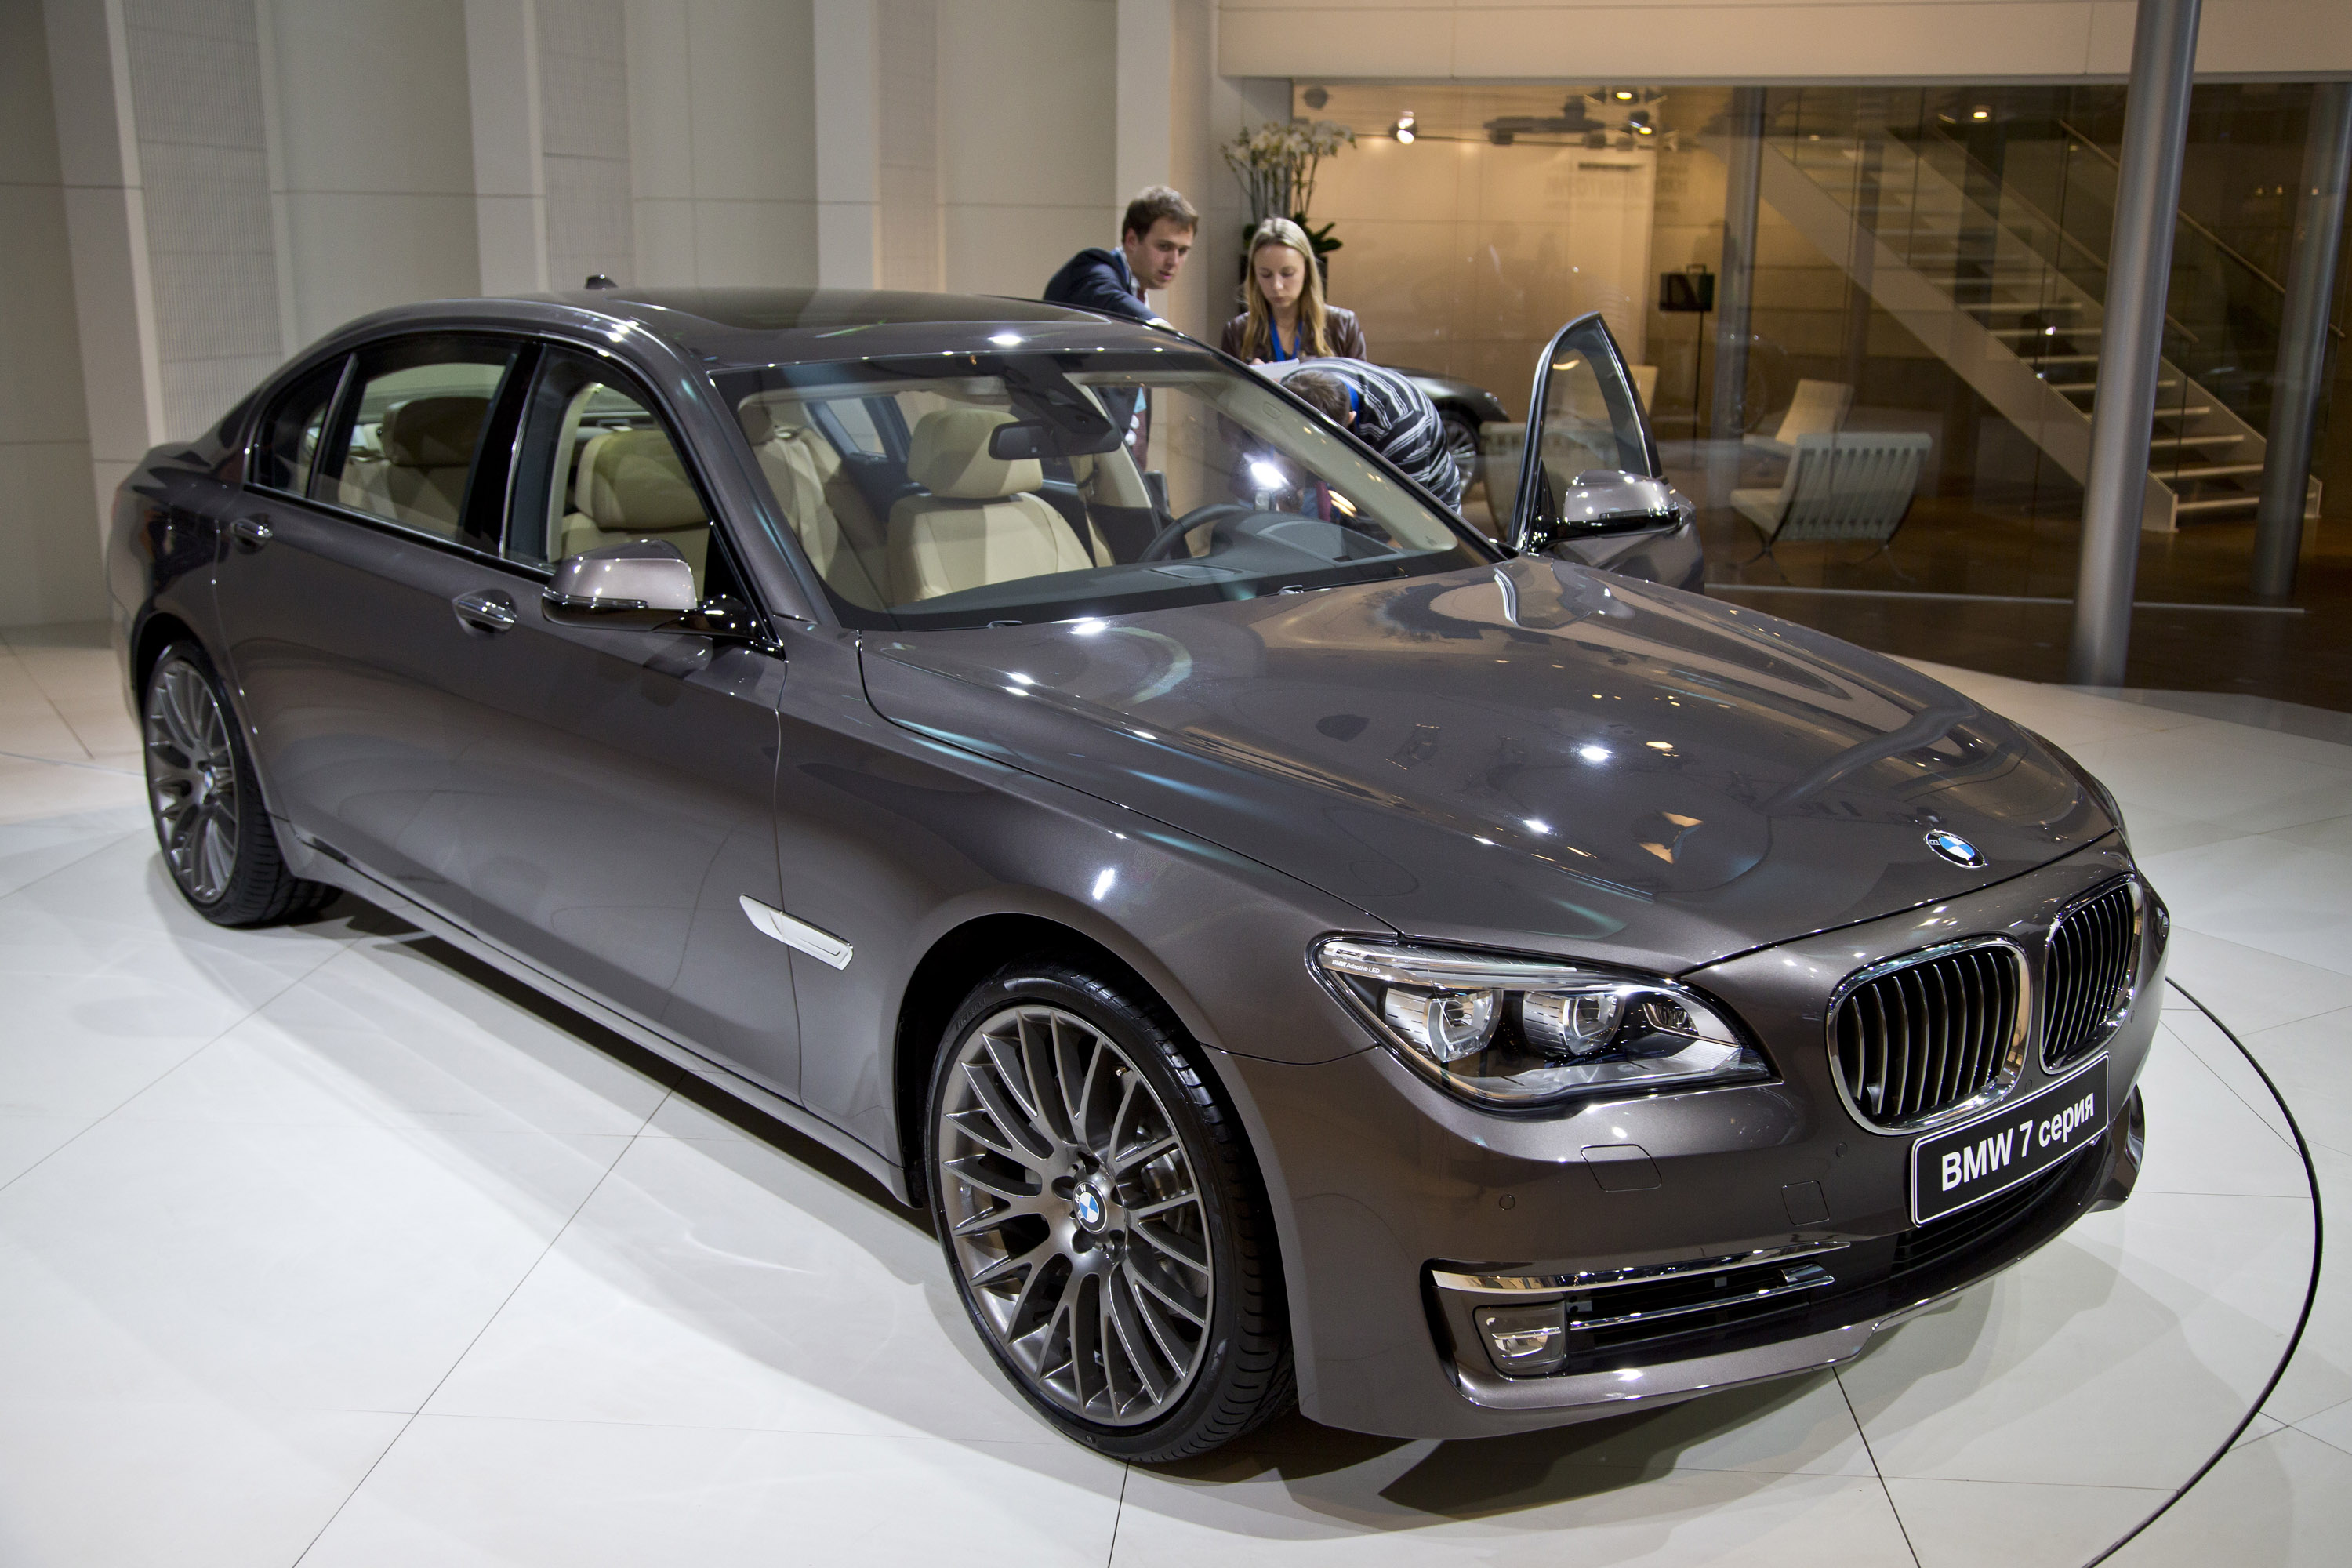 Bmw 7 series unveiling moscow